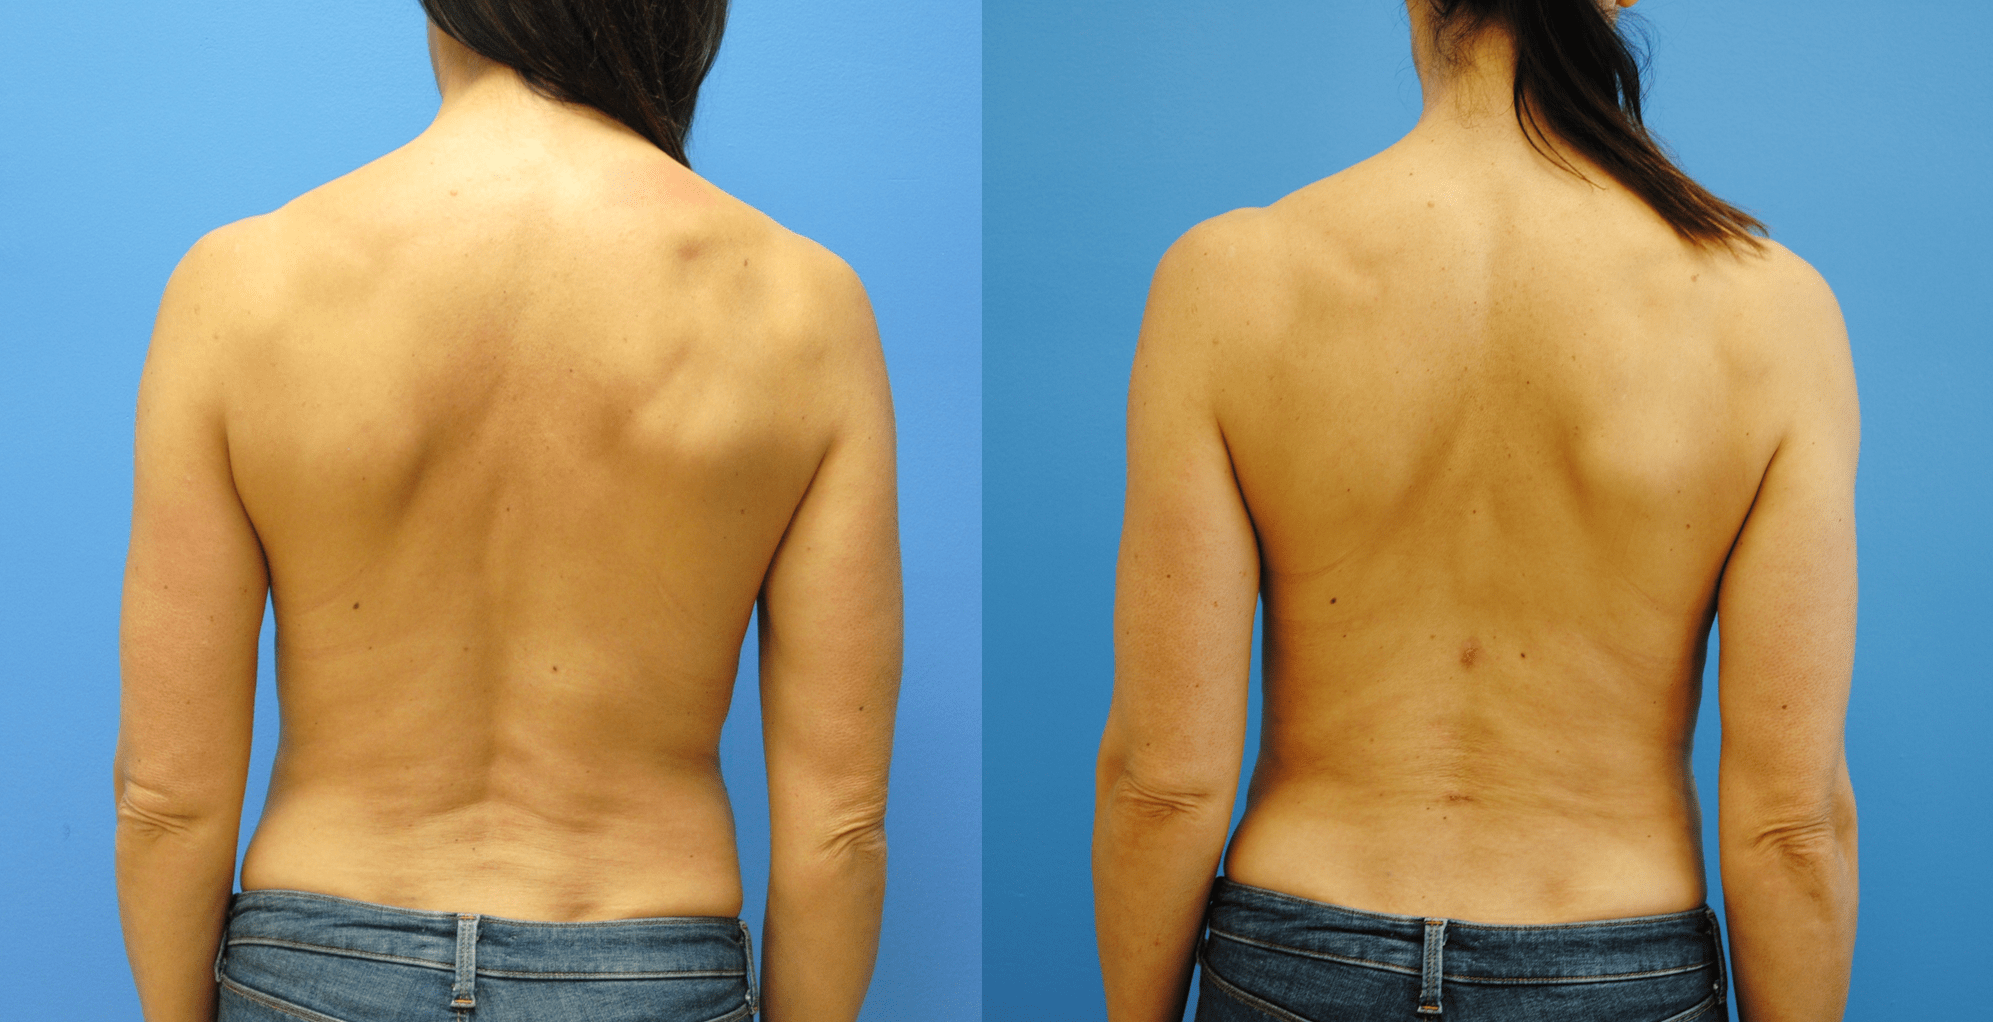 Lower Back Liposuction in Female Athletes. Liposuction of Flanks, Abdomen, Back, and Bra Fat-Circumferential Liposuction